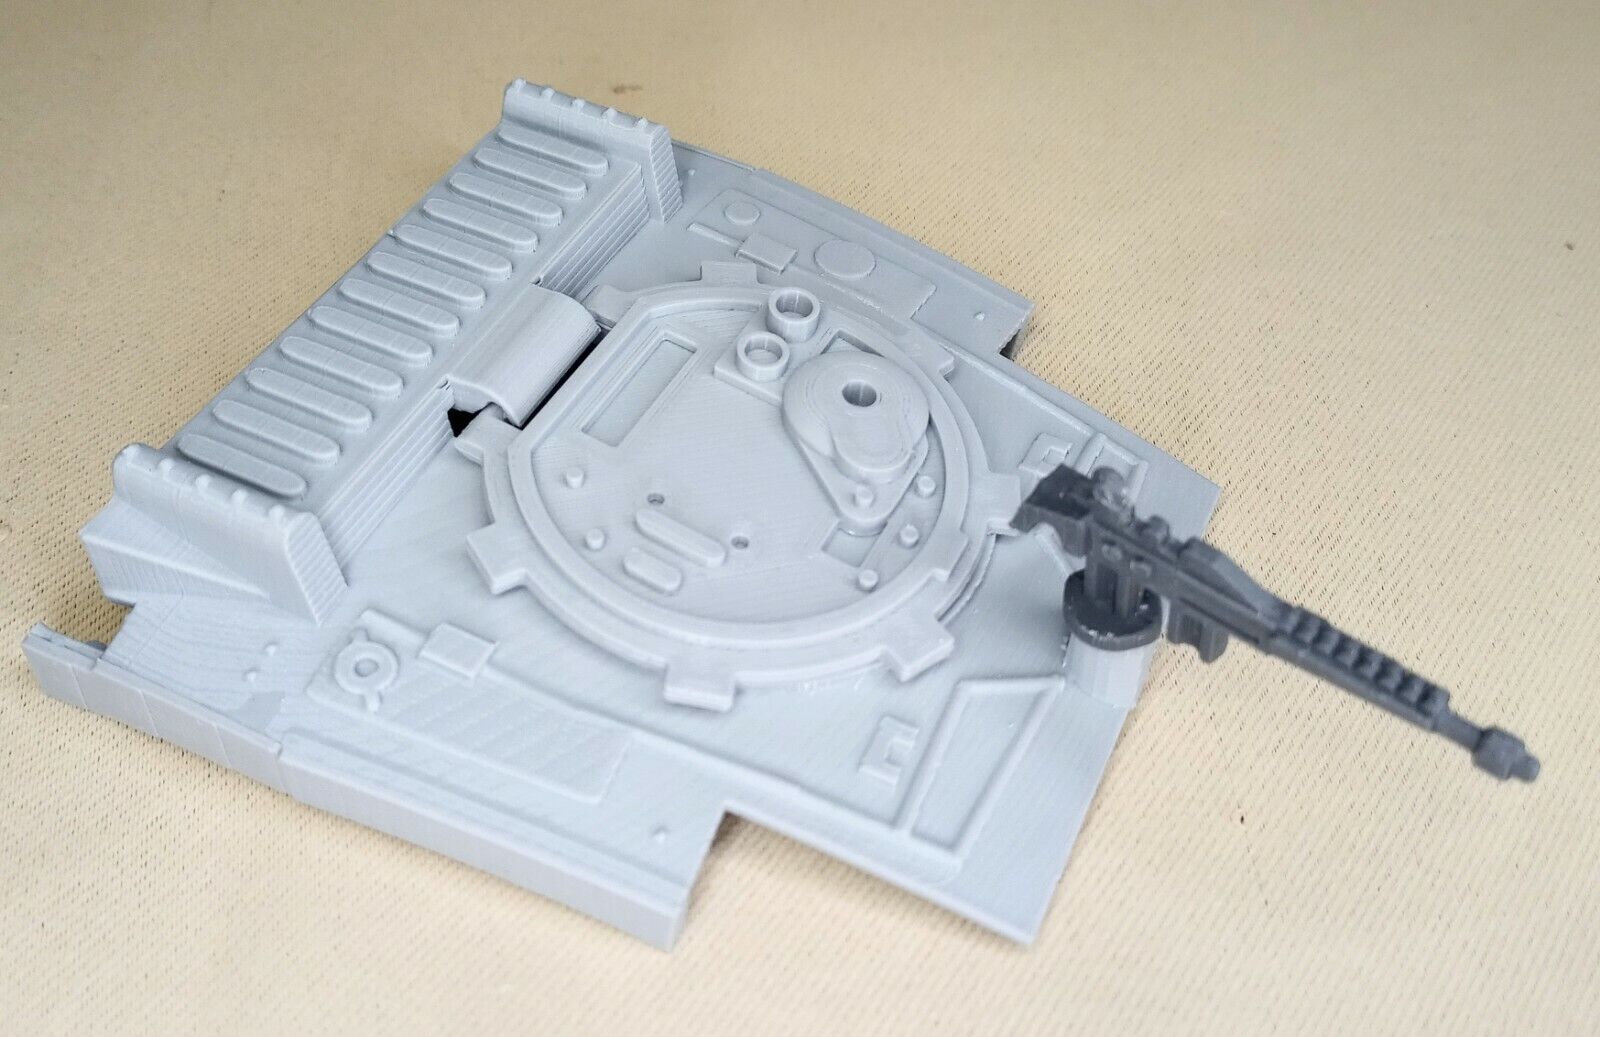 Star Wars Kenner AT-ST Parts - Replacement Top Canopy, Hatch & Gun 3D Printed